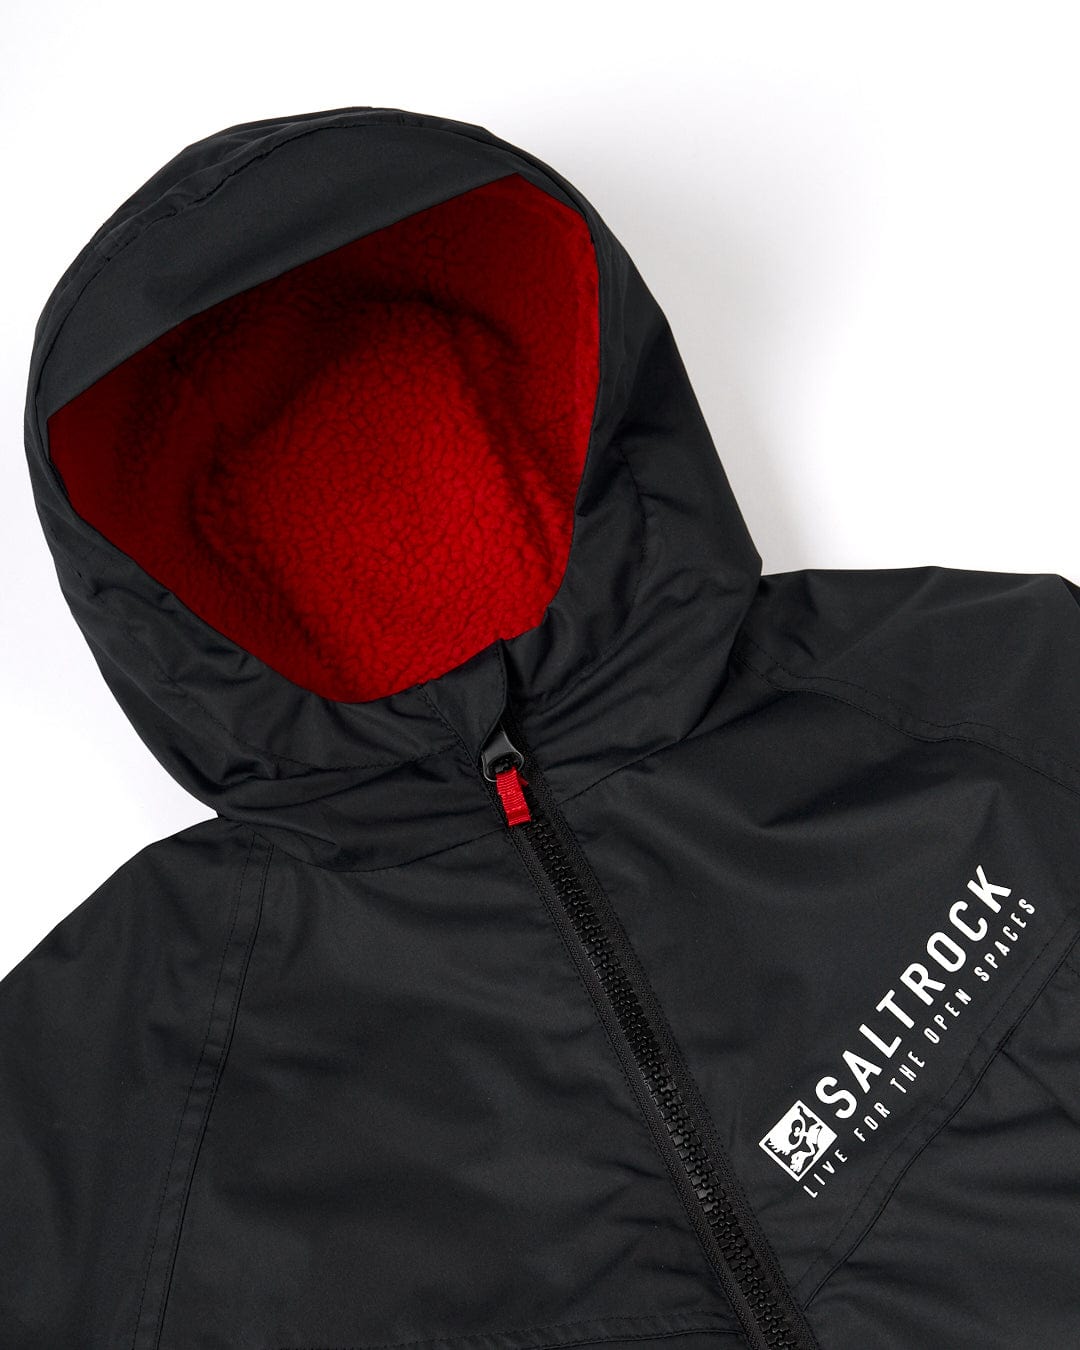 Close-up of a Saltrock Kids Four Seasons Changing Robe - Black/Red made from 3K waterproof ripstop material, with a red inner lining, displaying the logo on the left chest area.